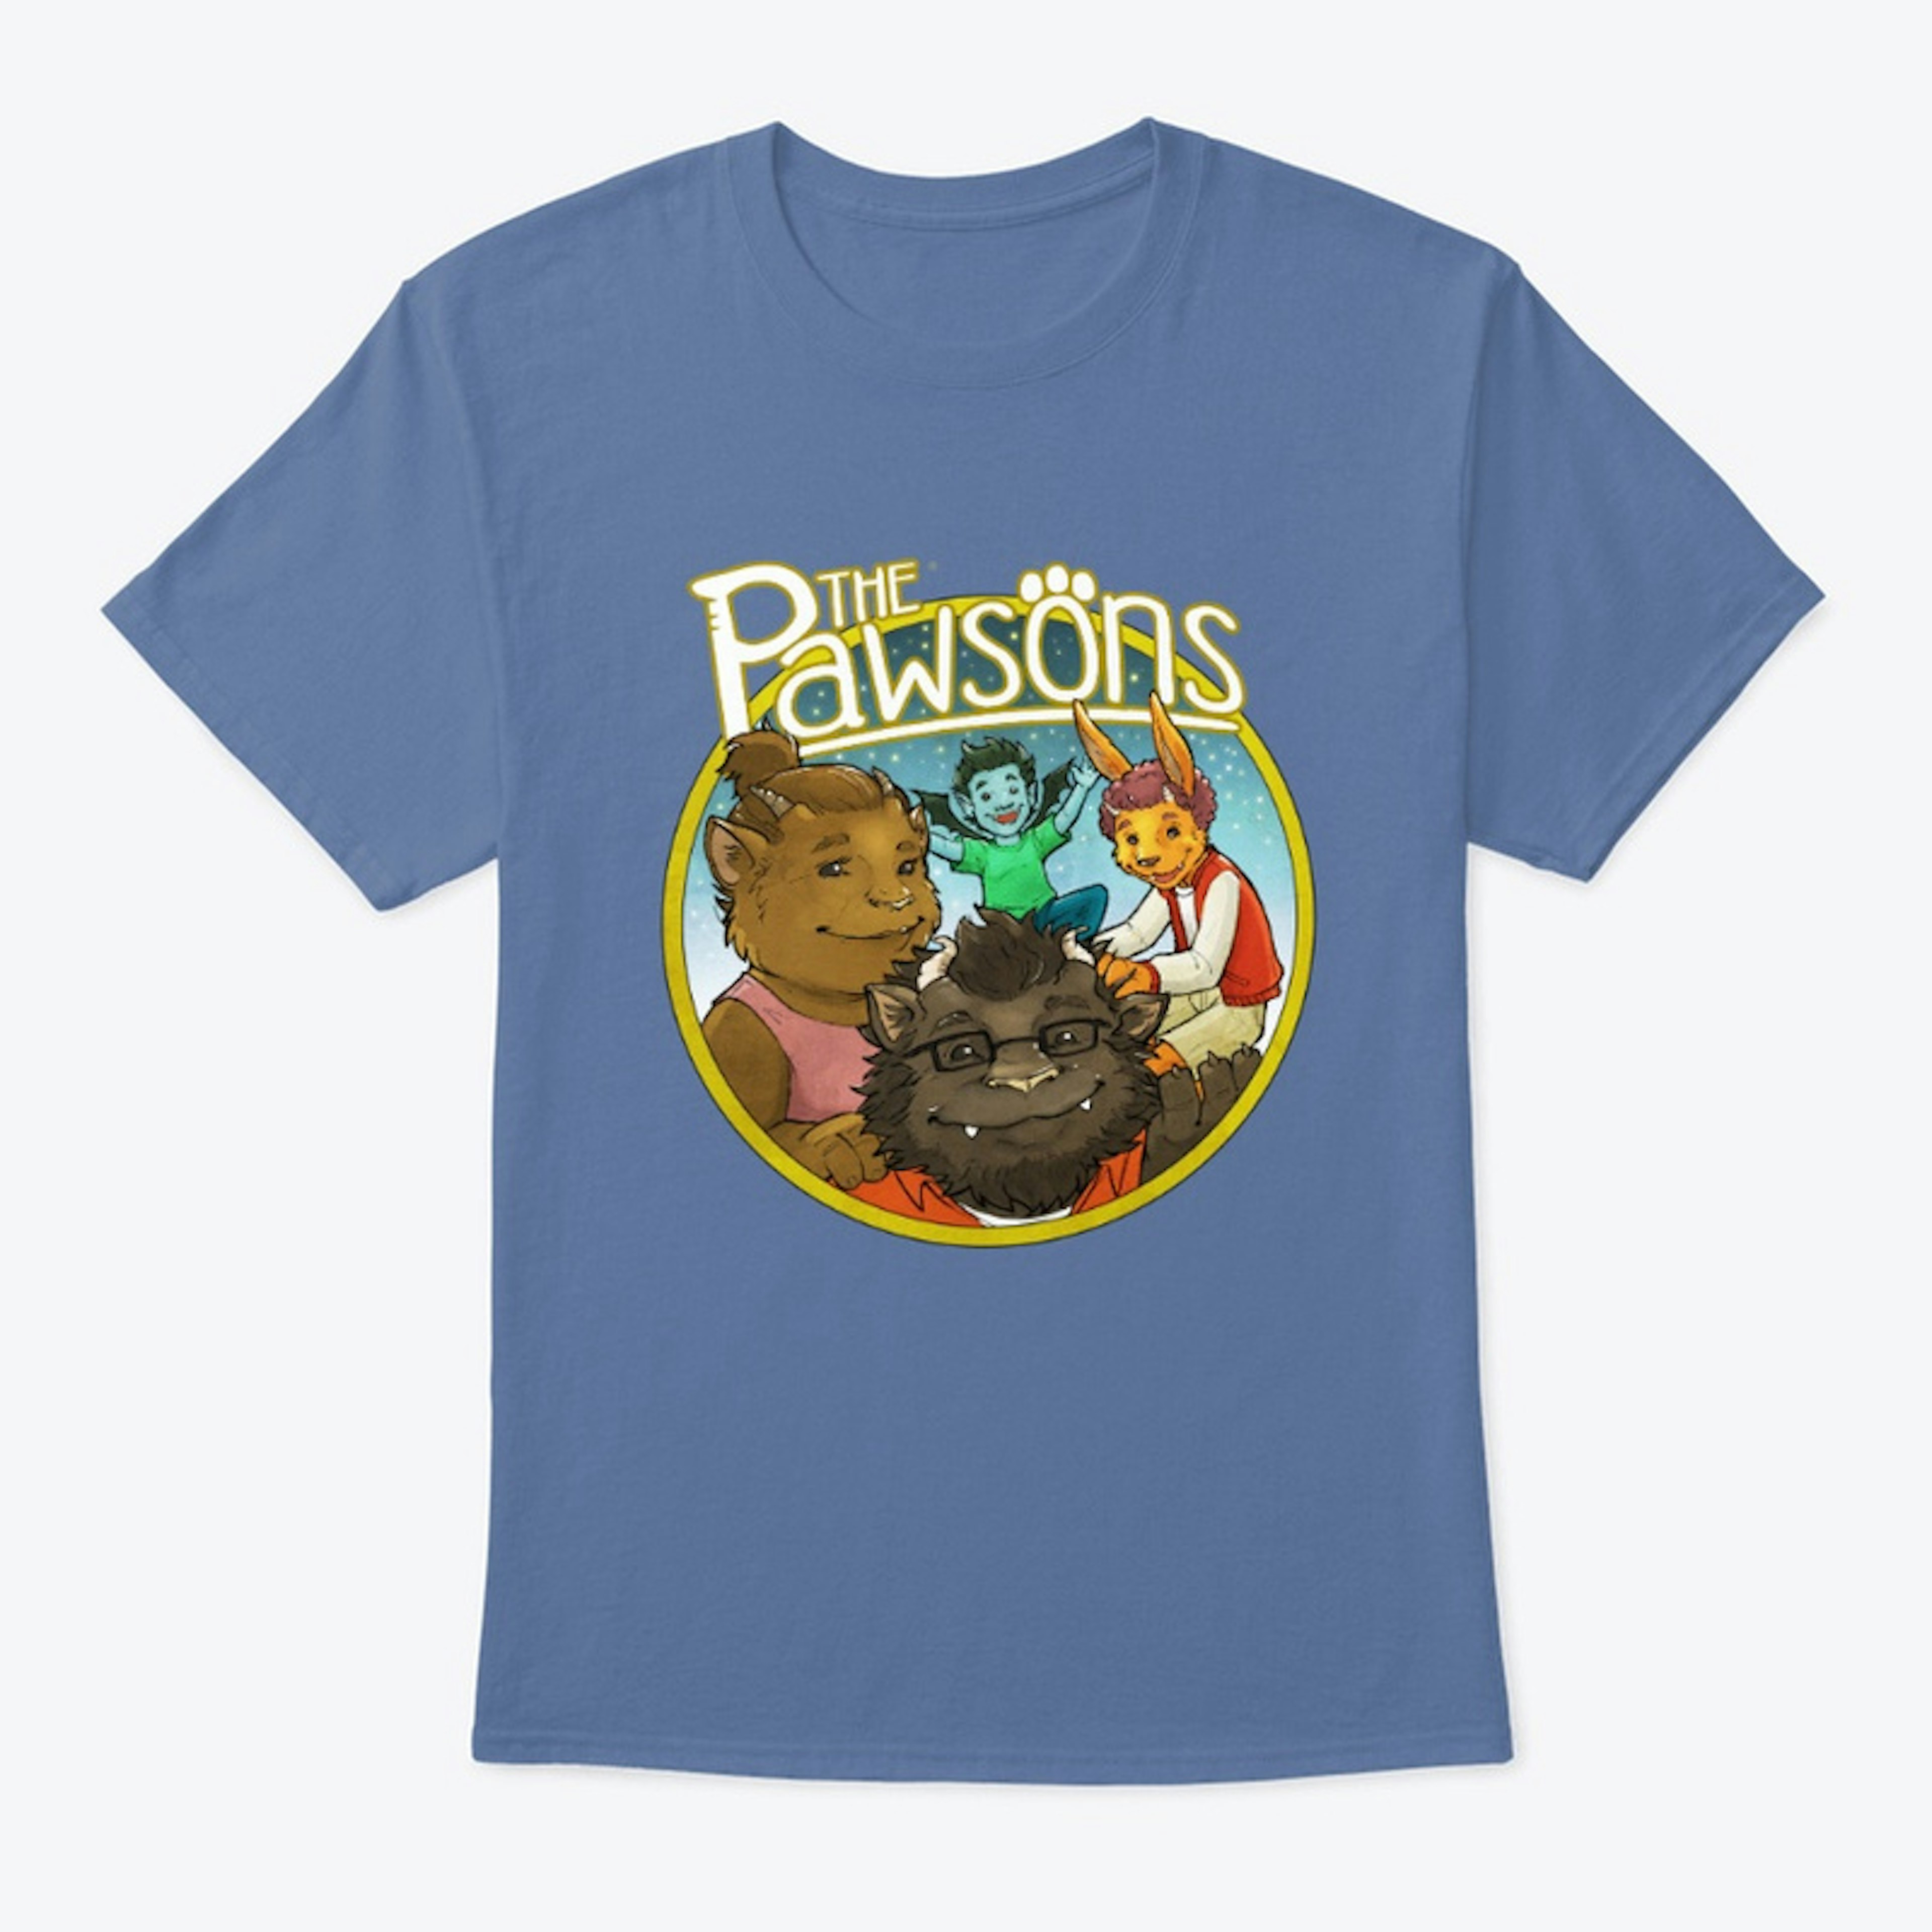 The Pawsons merch is here!